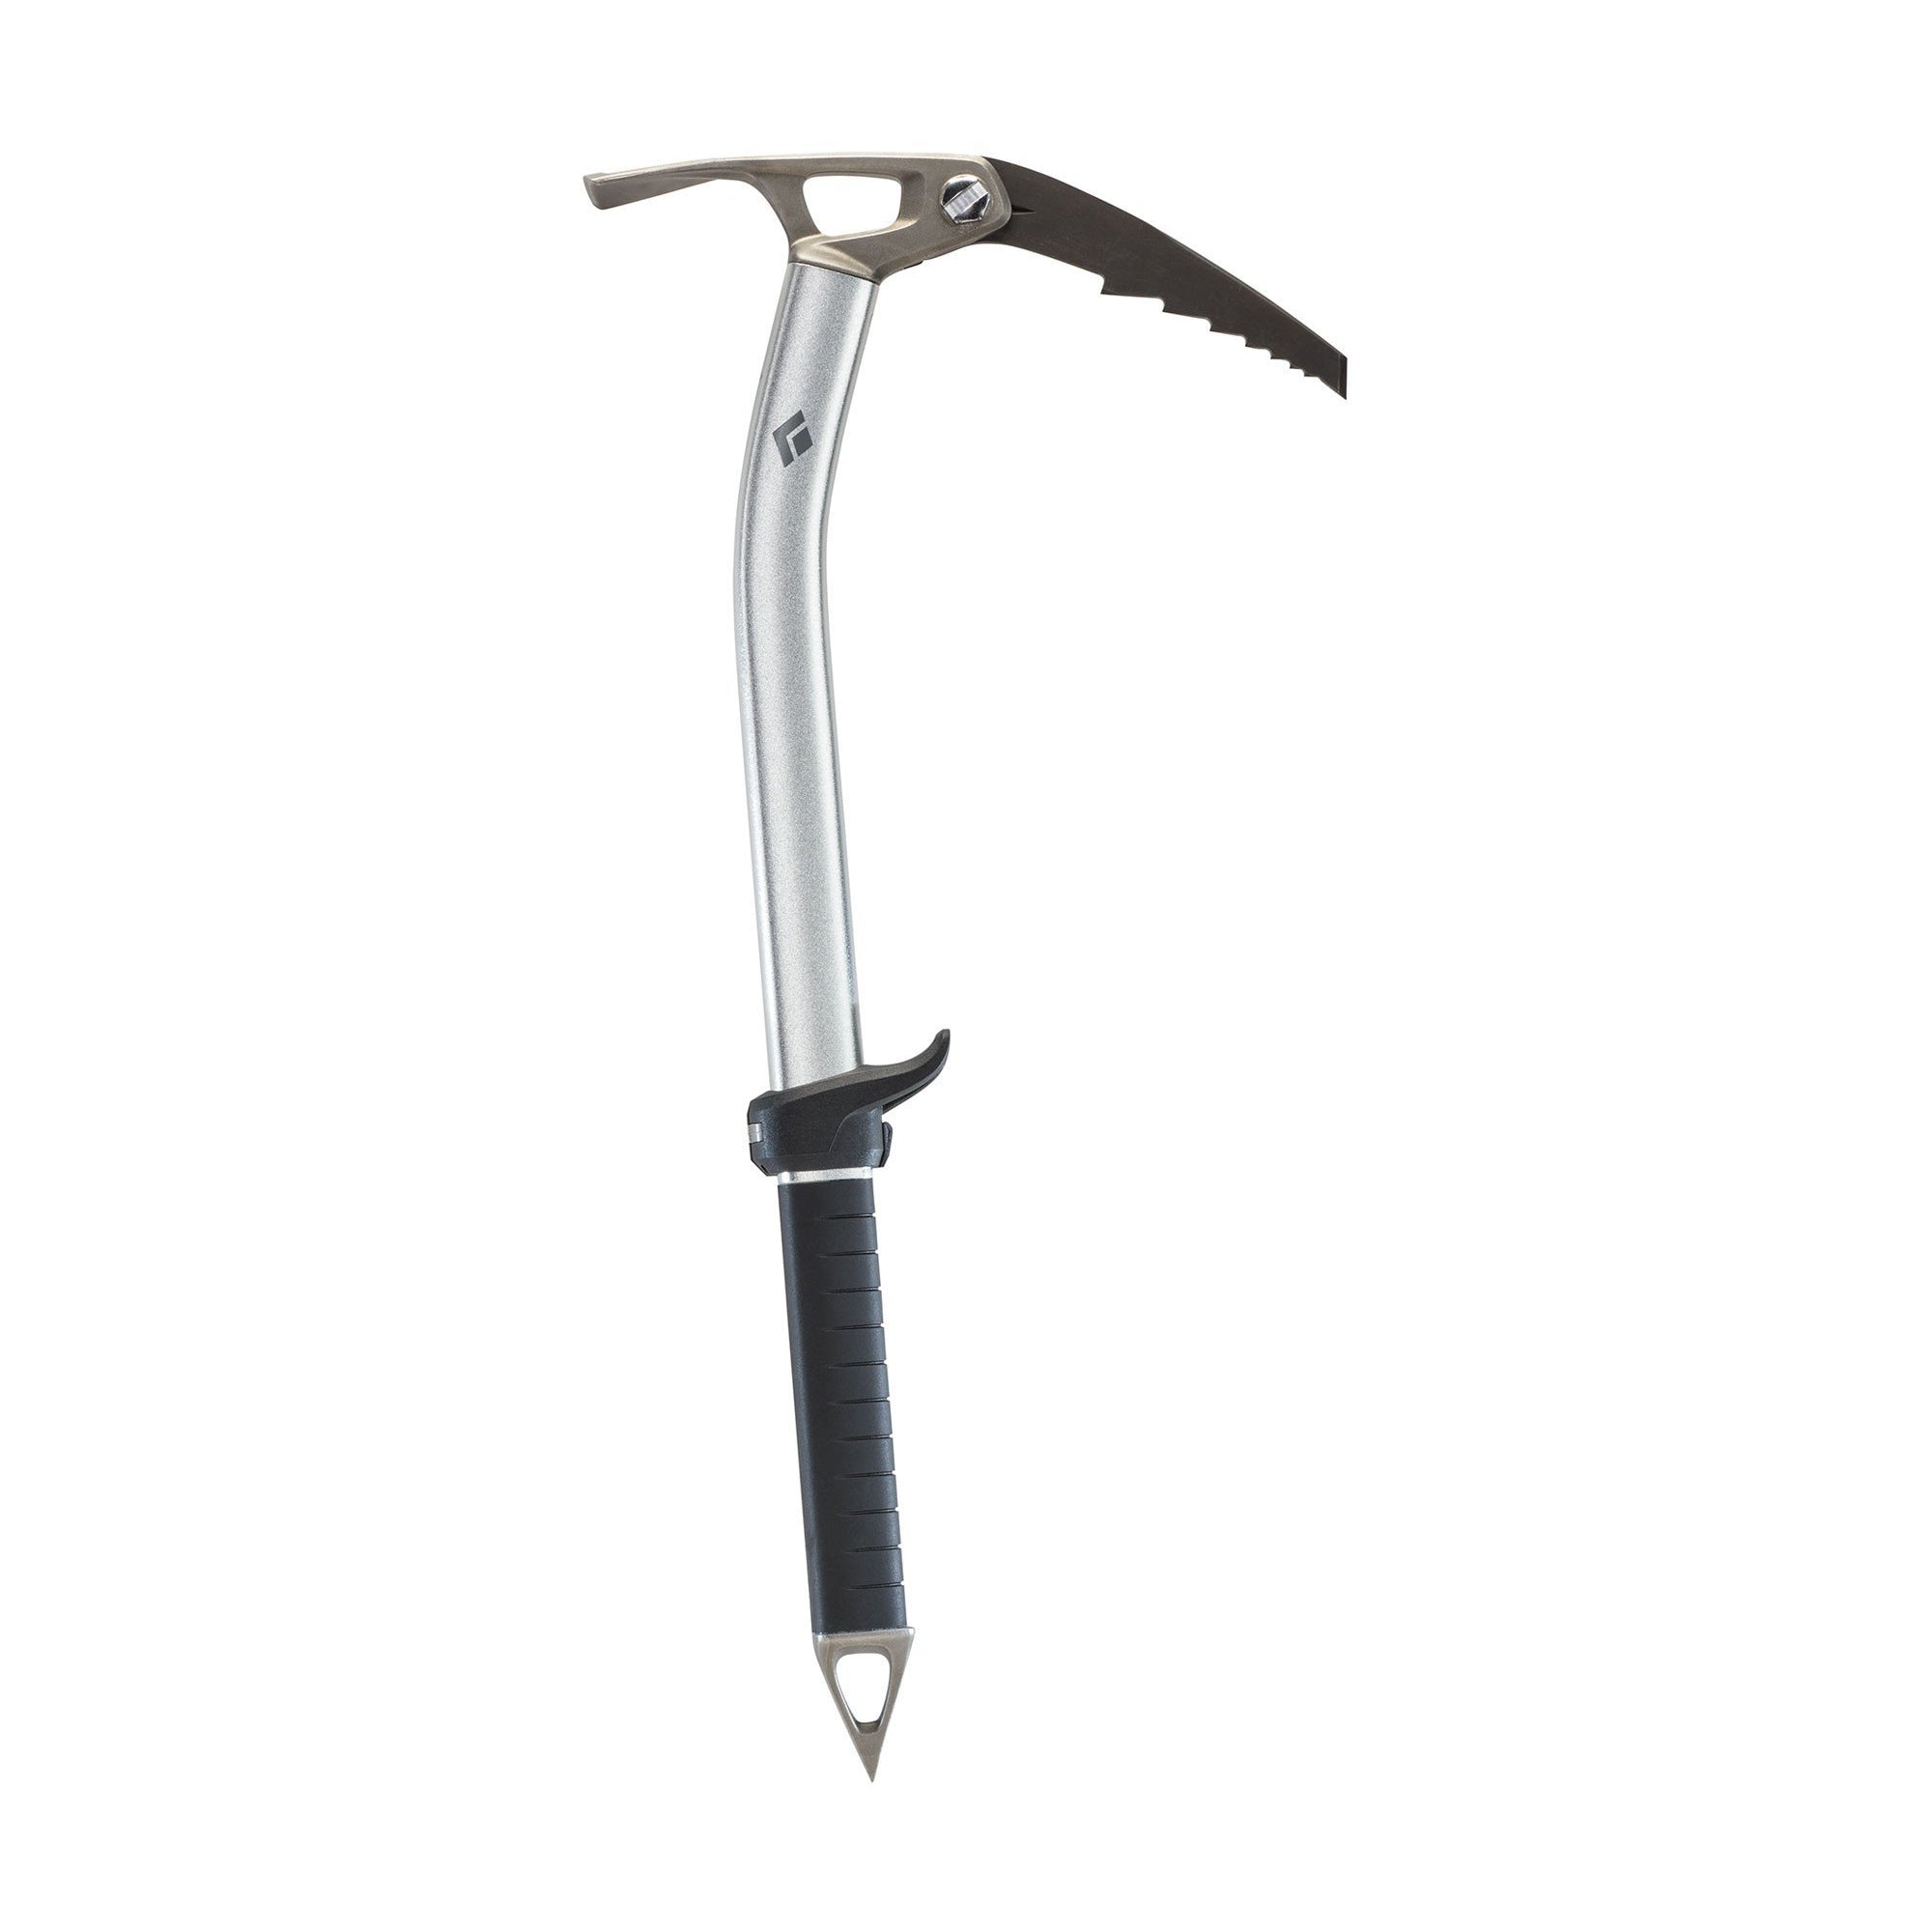 Black Diamond Venom Ice Tool, side view showing with black handle and silver shaft